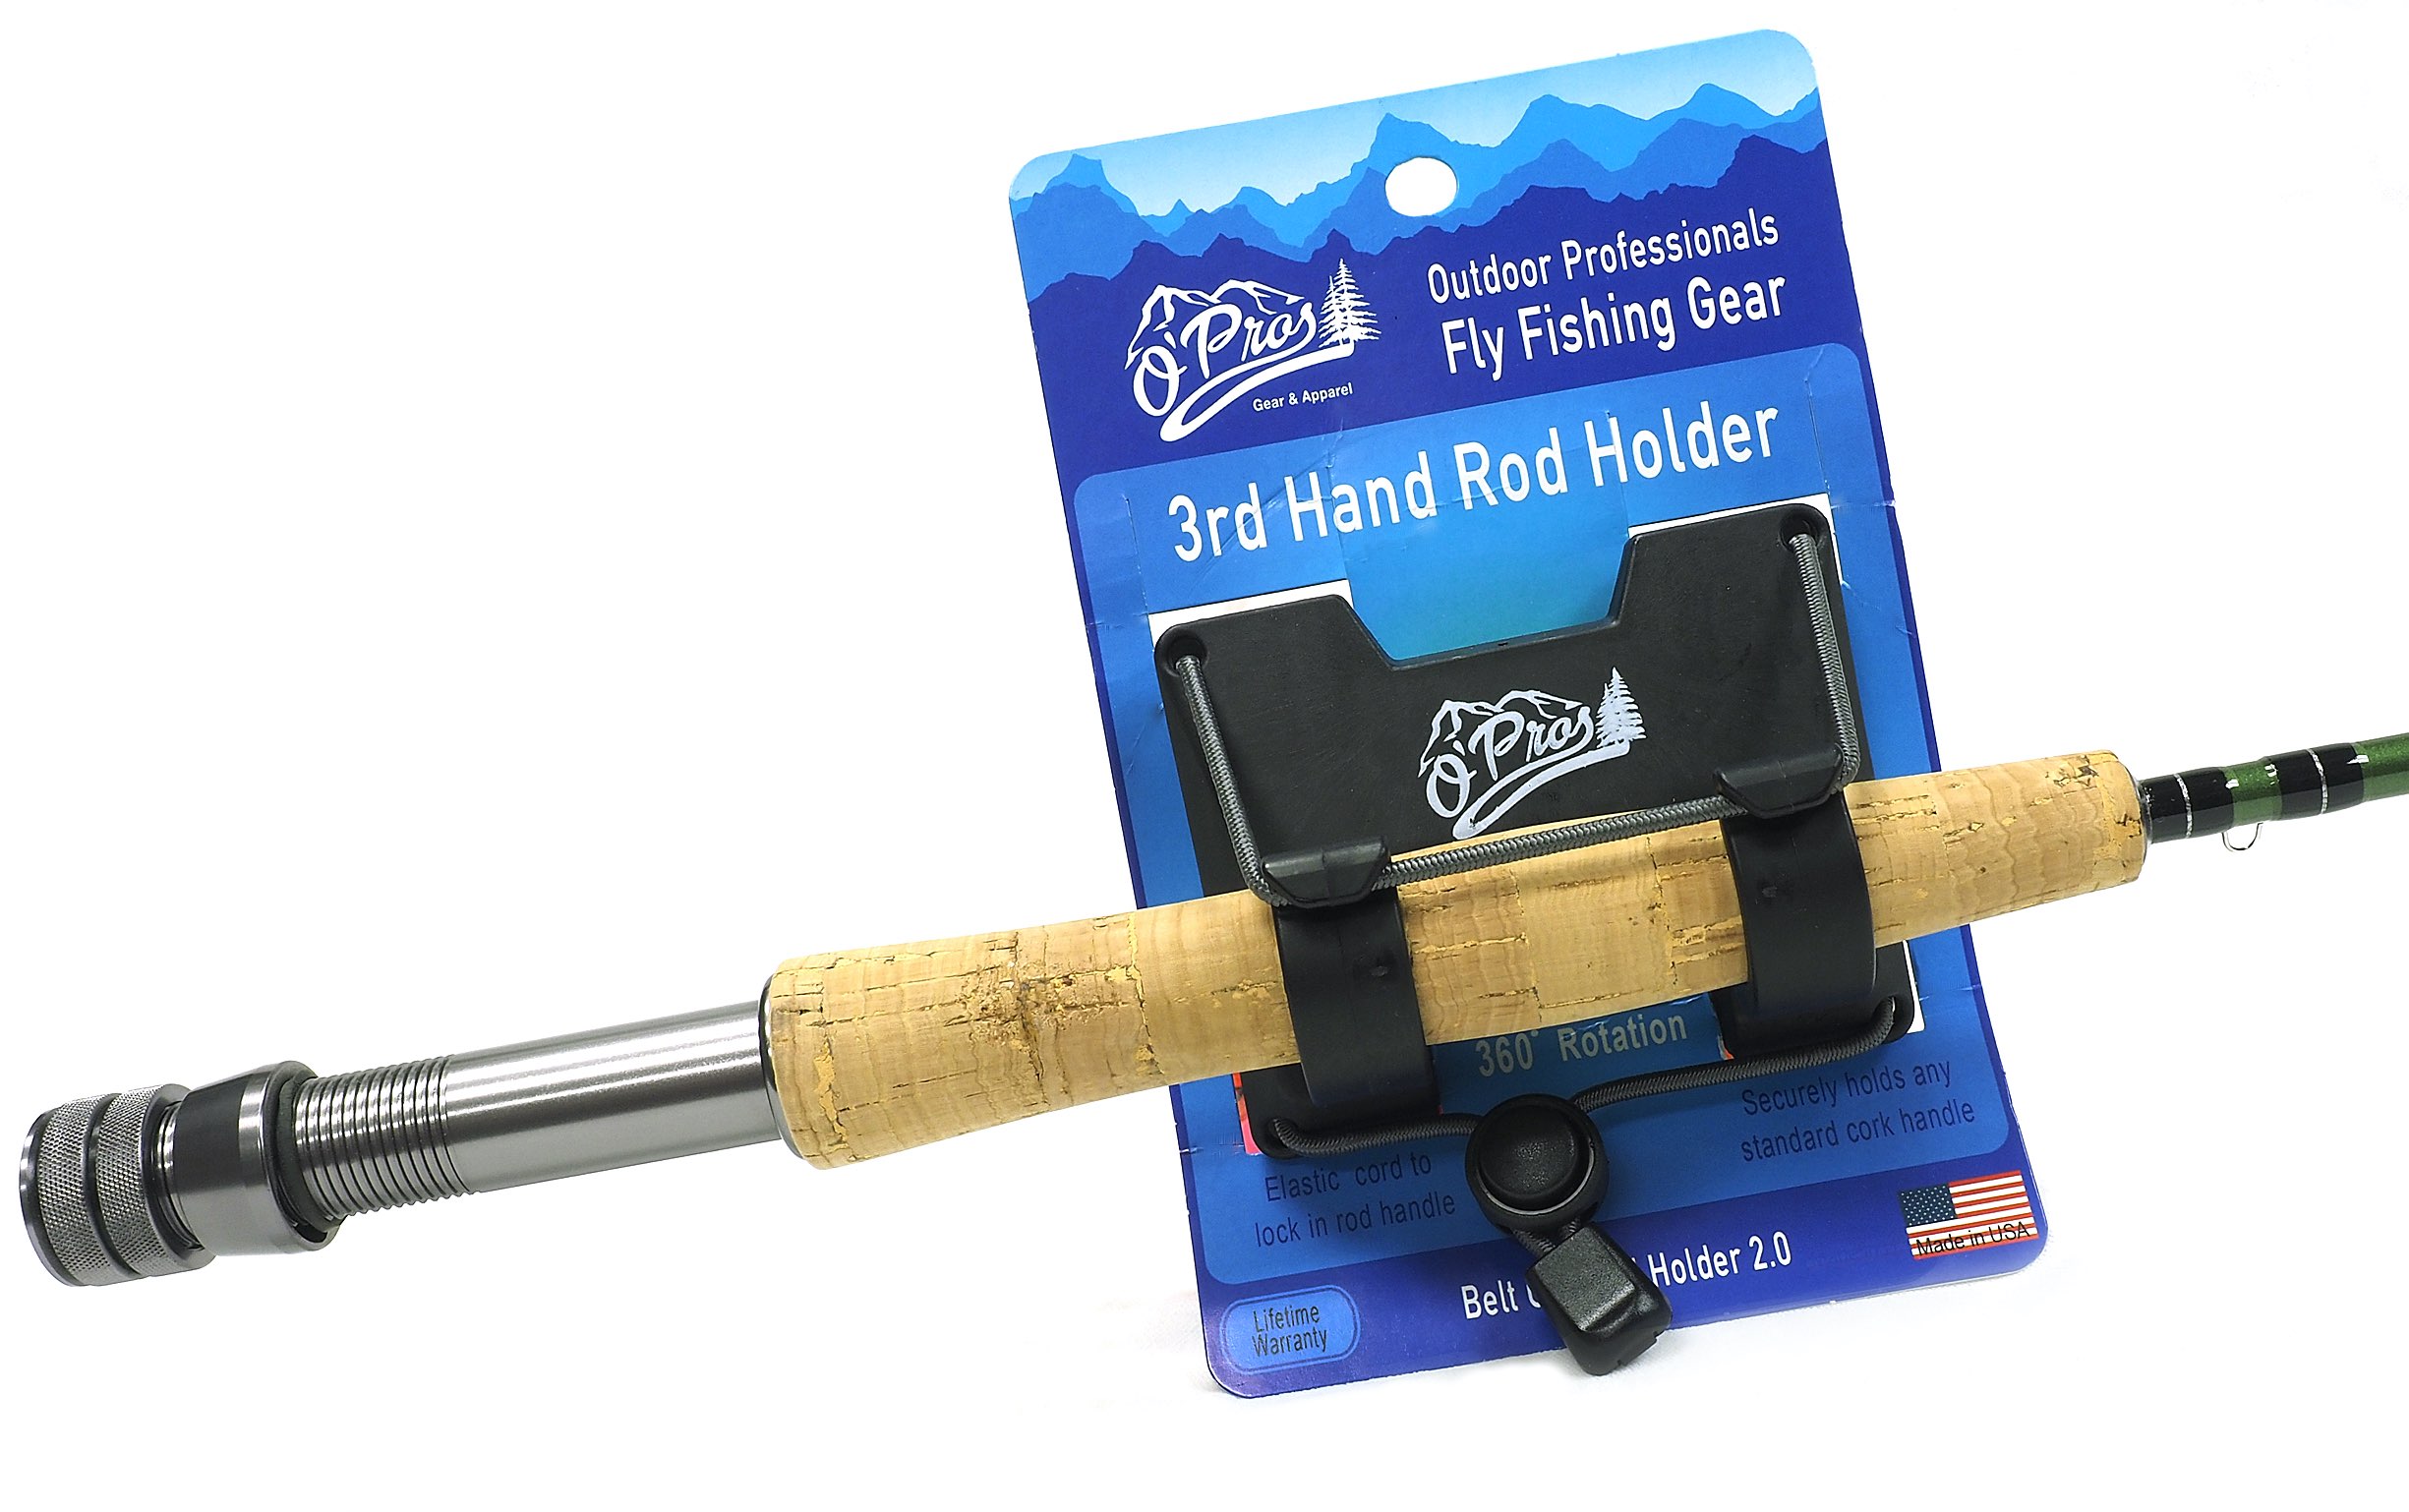 https://hooklineandsinker.ca/wp-content/uploads/2019/11/O-Pros-Outdoor-Professionals-Fly-Fishing-Gear-3rd-Third-Hand-Rod-Holder-AA.jpg